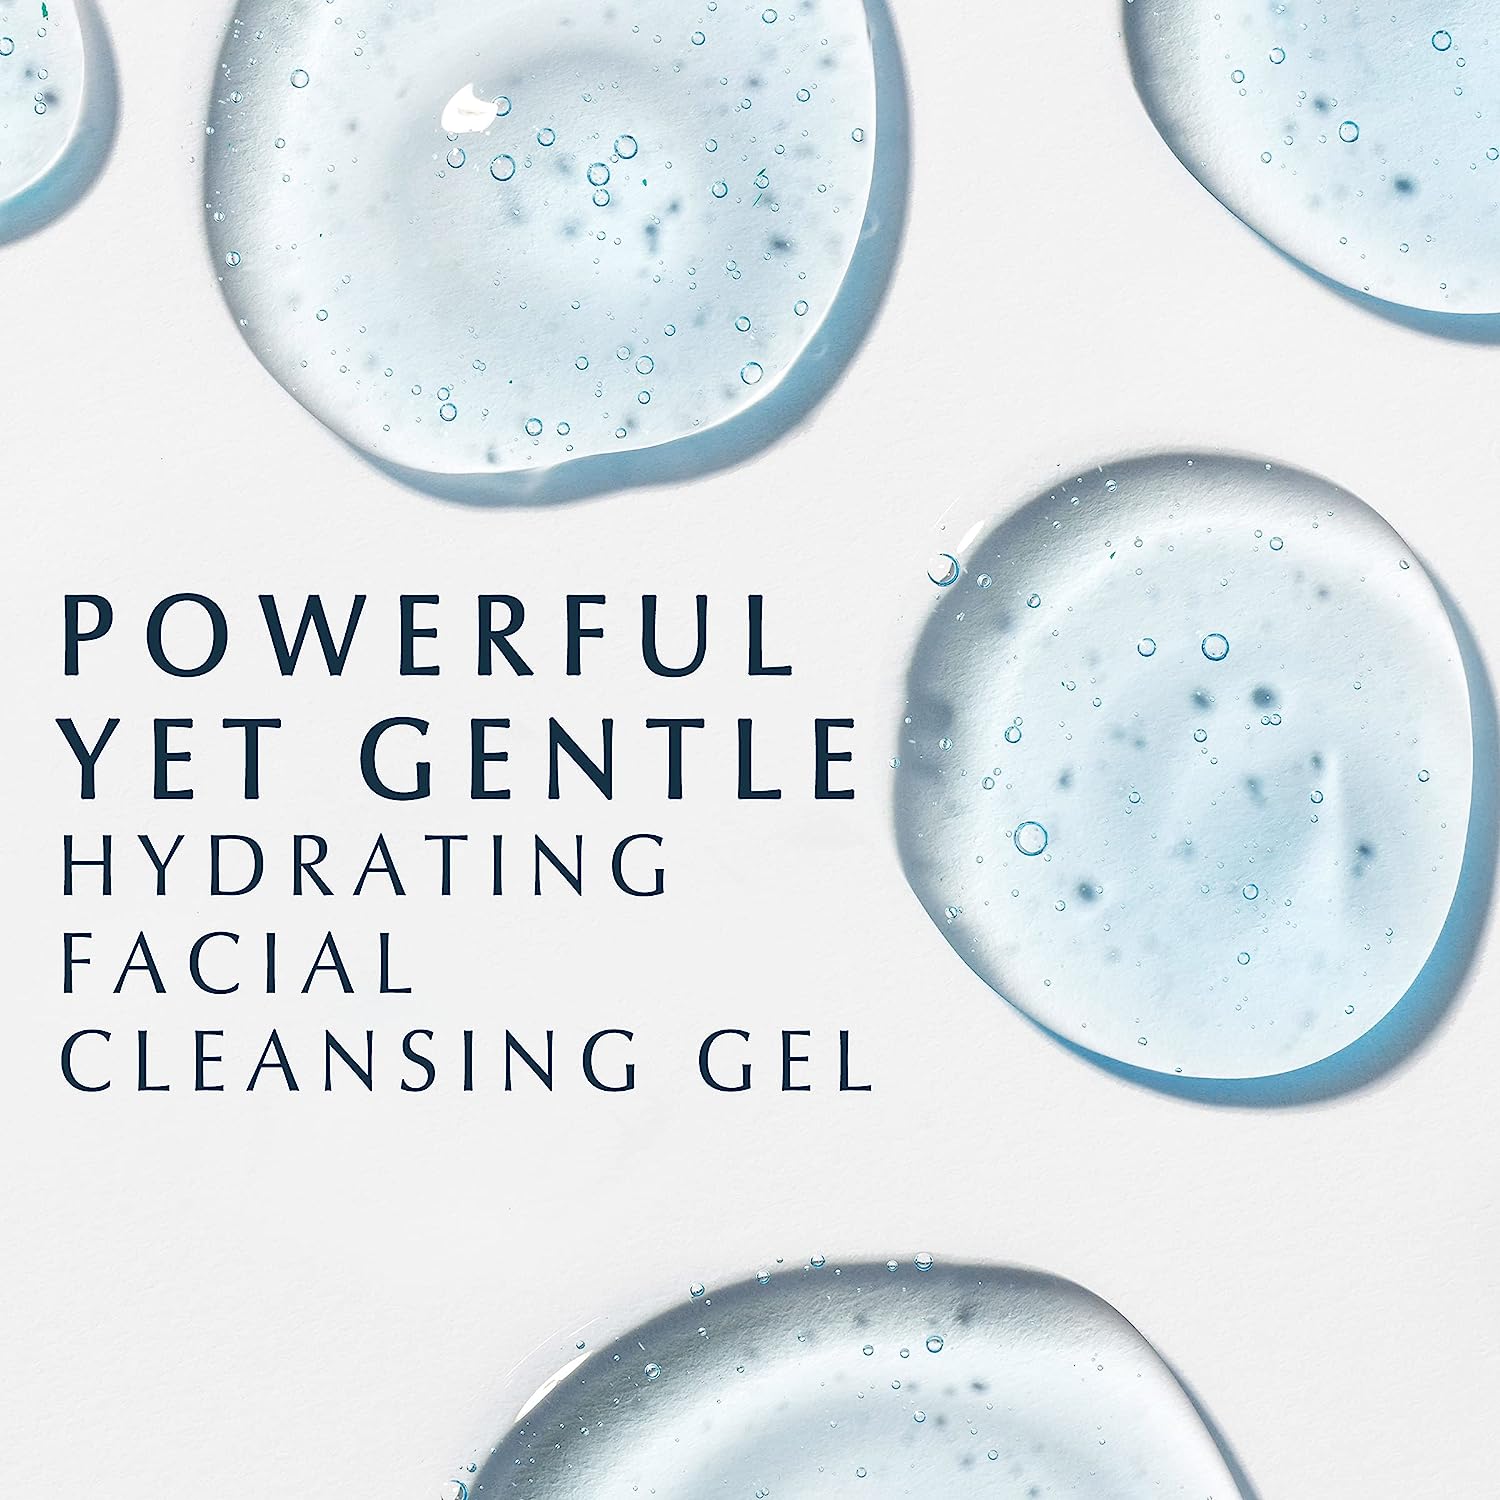 Eucerin Hydrating Cleansing Gel, Daily Facial Cleanser Formulated with Hyaluronic Acid, 6.8 Fl Oz